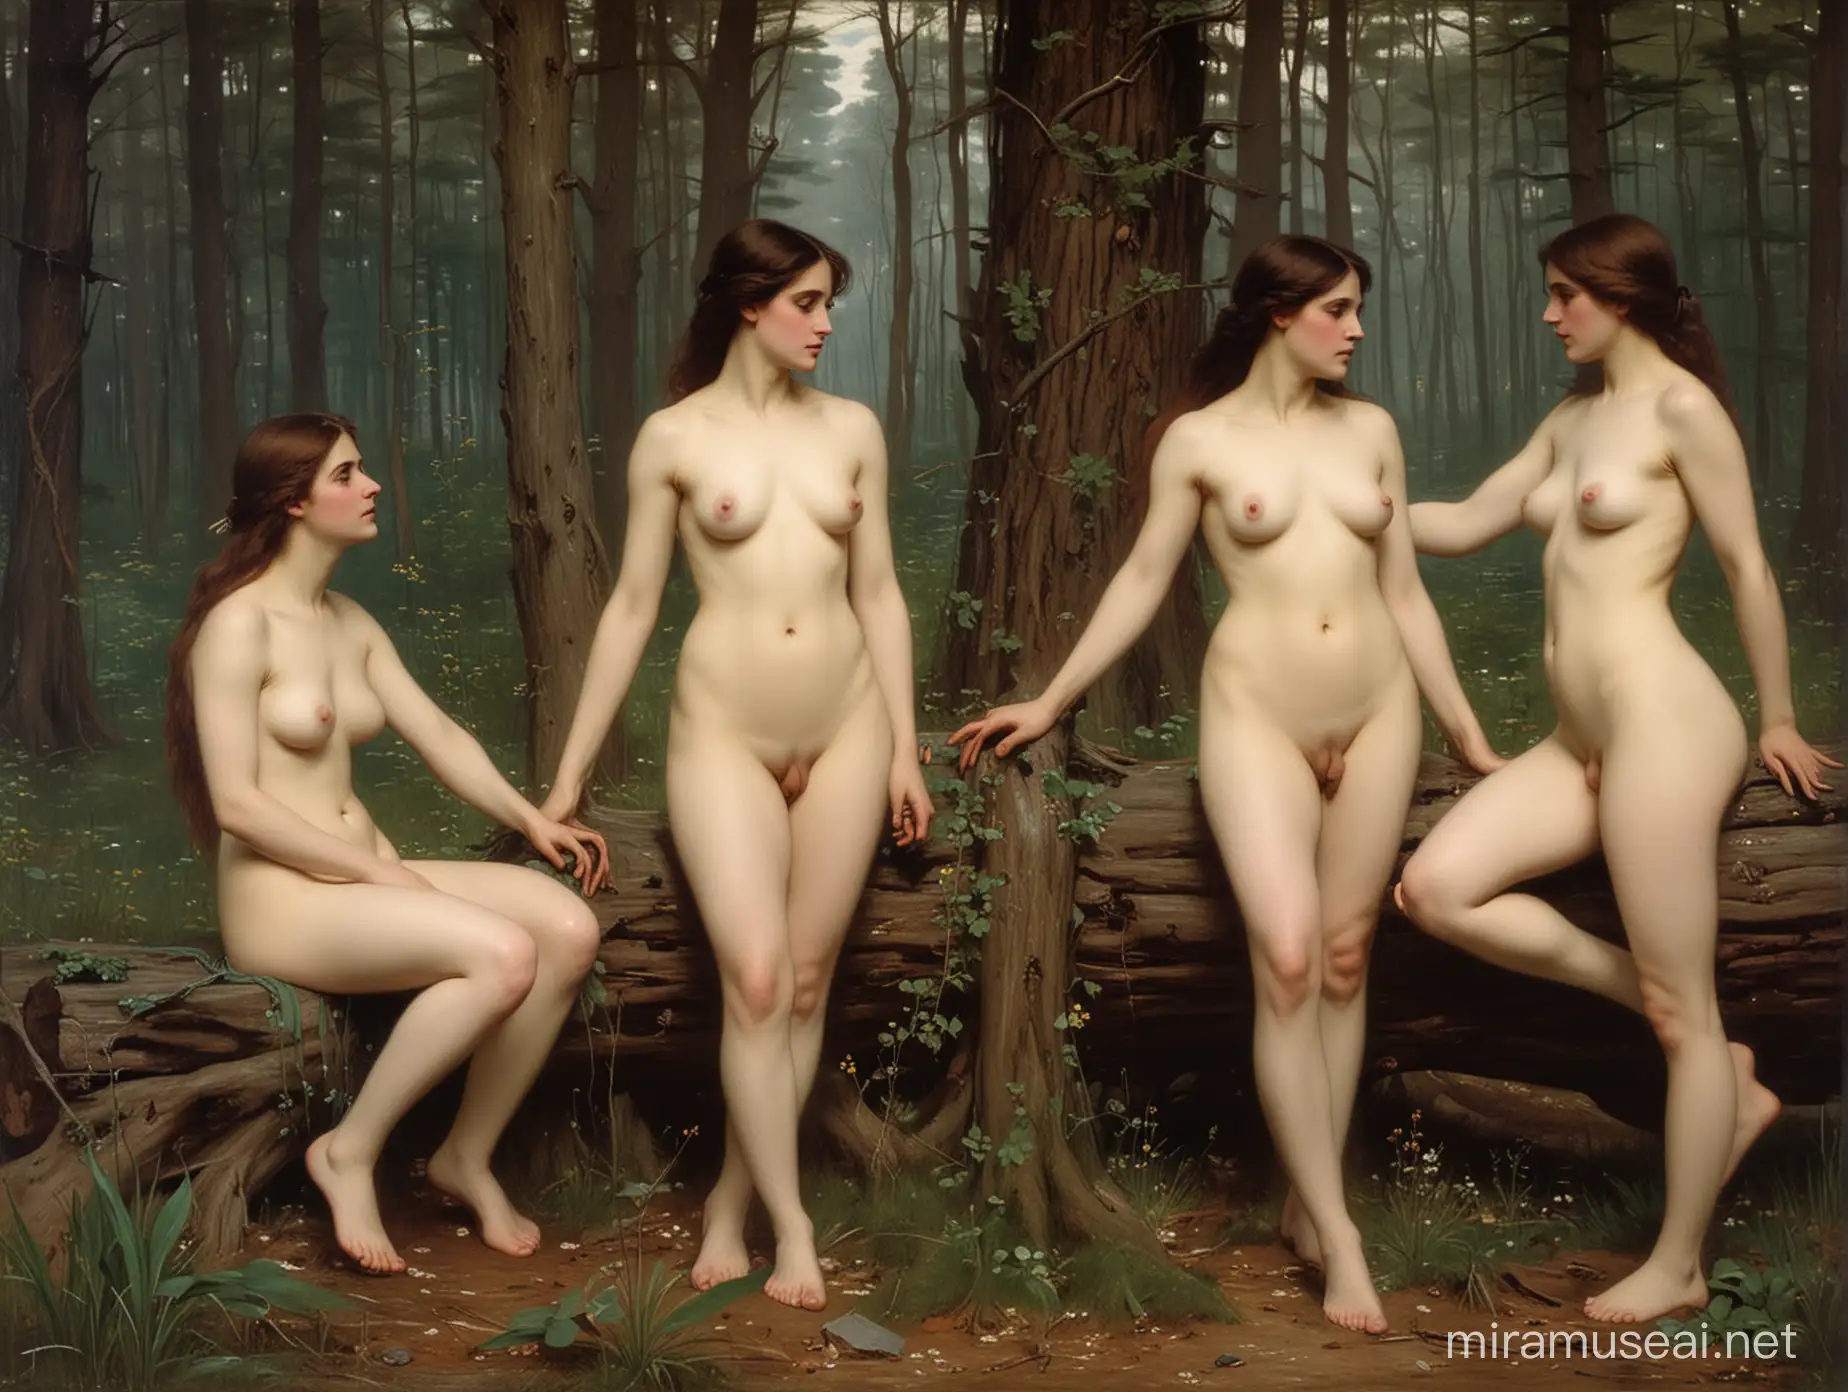 three nude muses in a h forest. John william waterhouse..